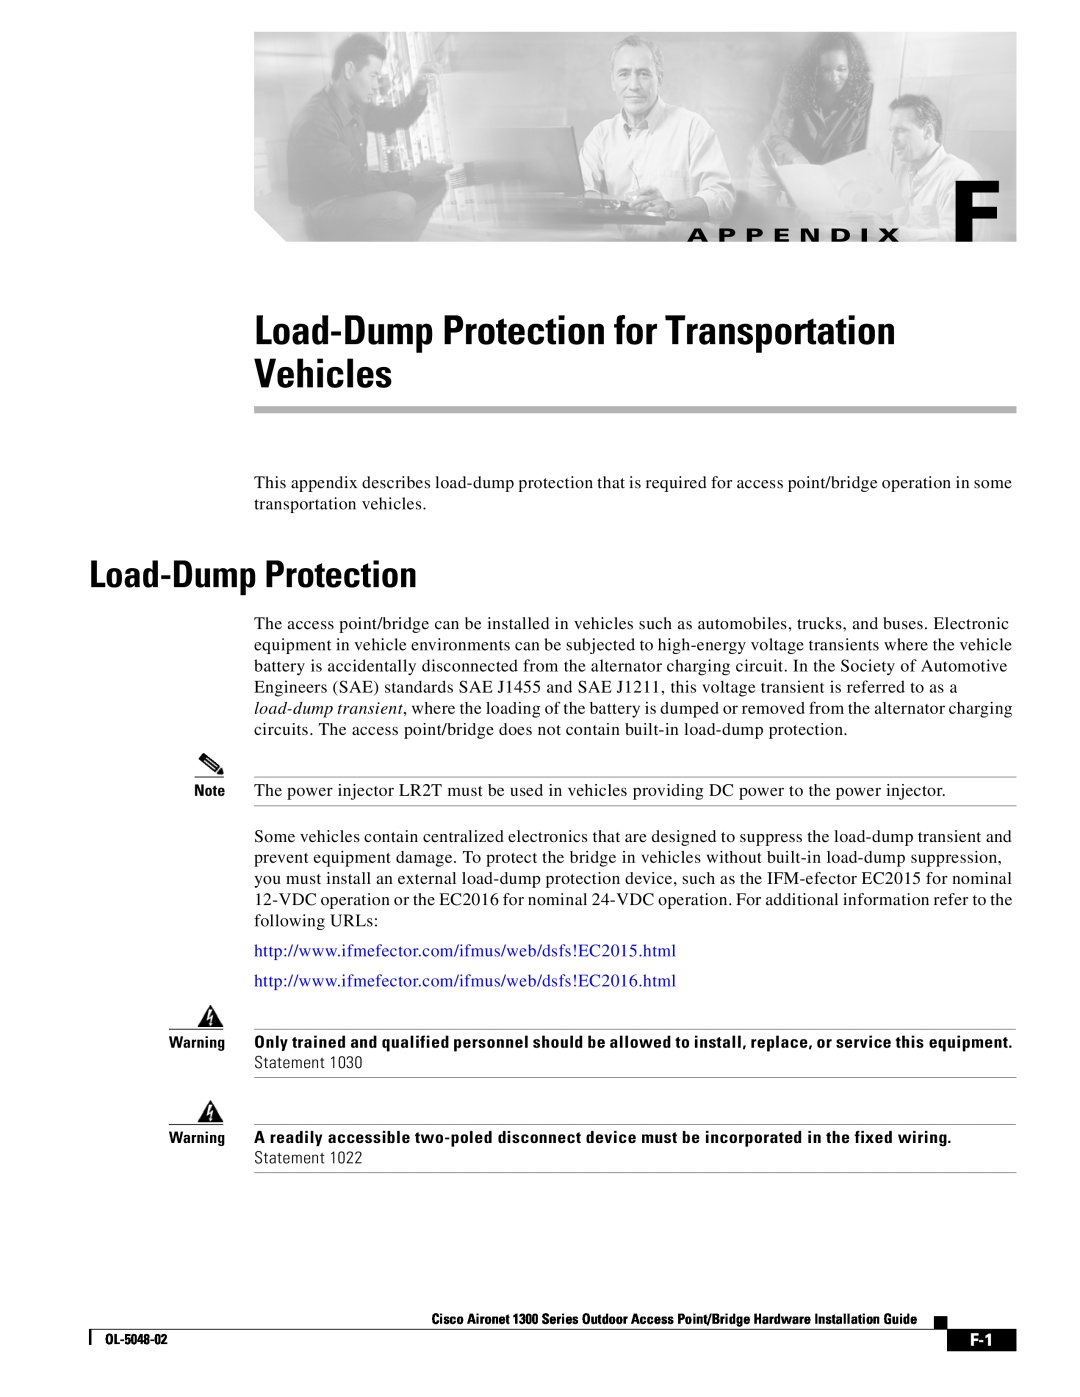 Cisco Systems 1300 Series manual Load-Dump Protection for Transportation Vehicles, A P P E N D I X F 